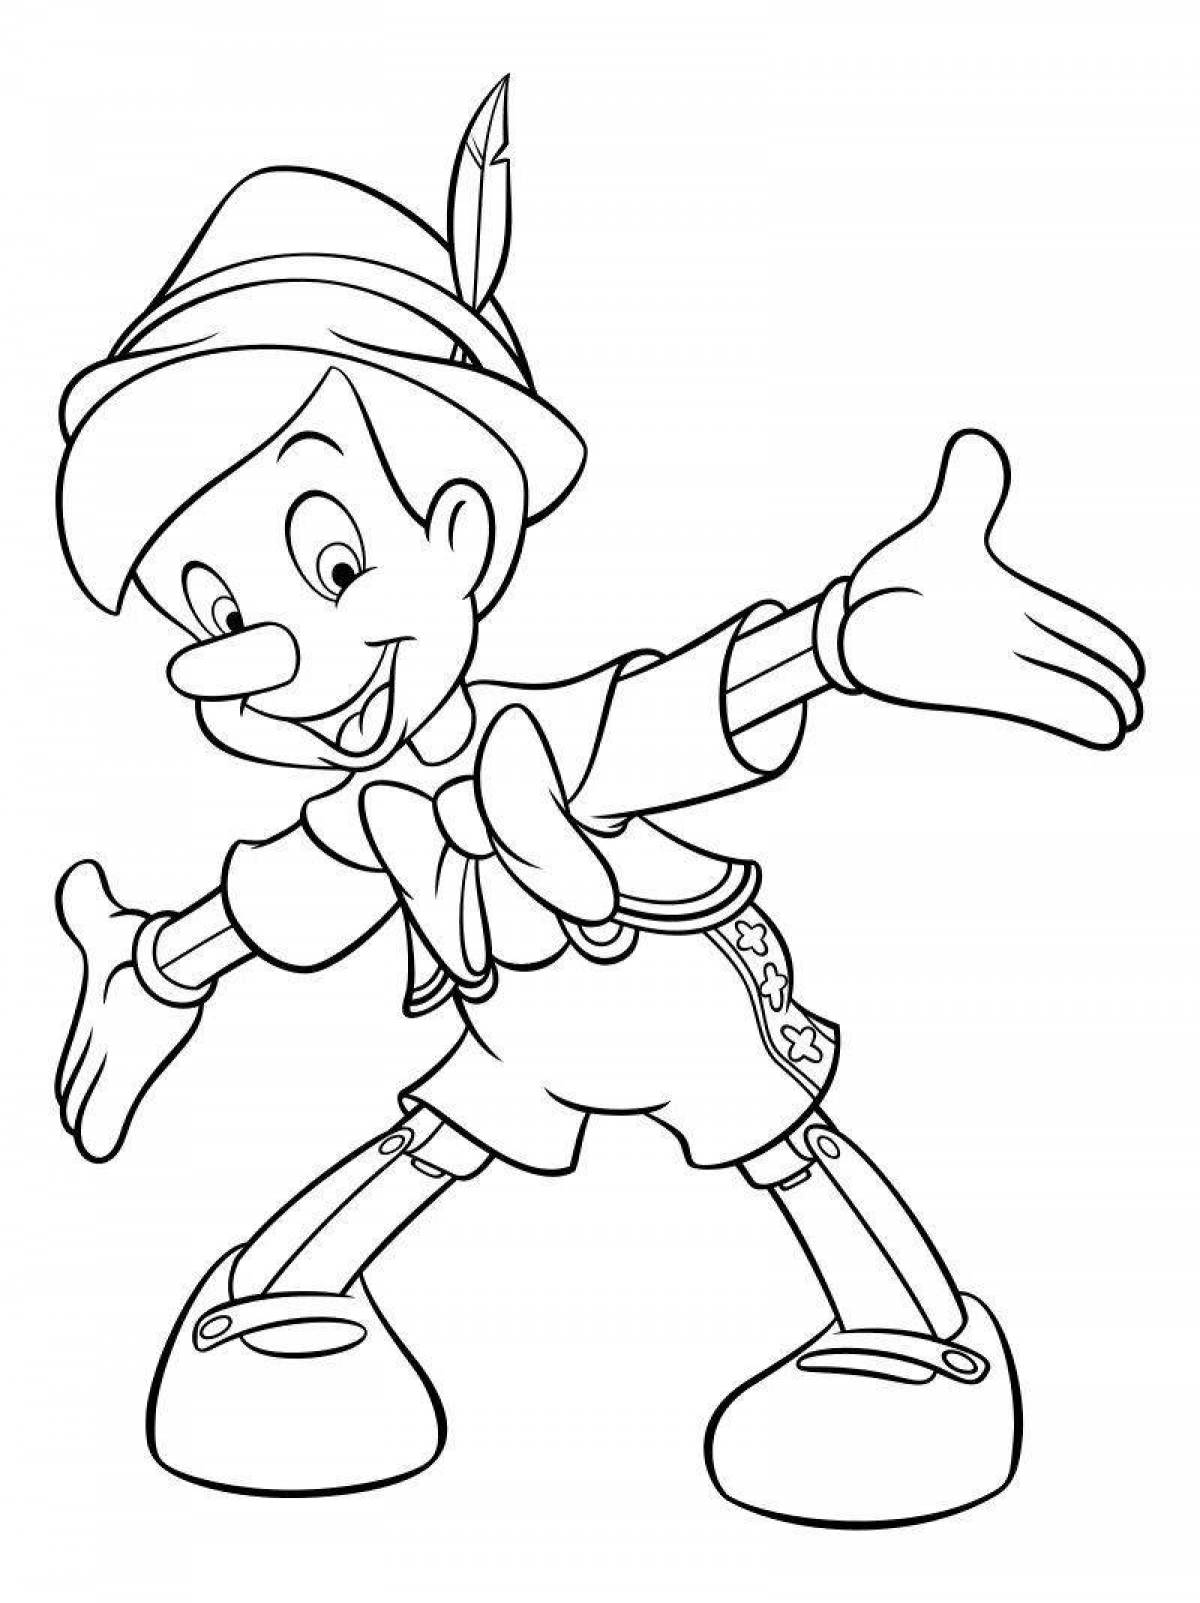 Living pinocchio coloring book for kids